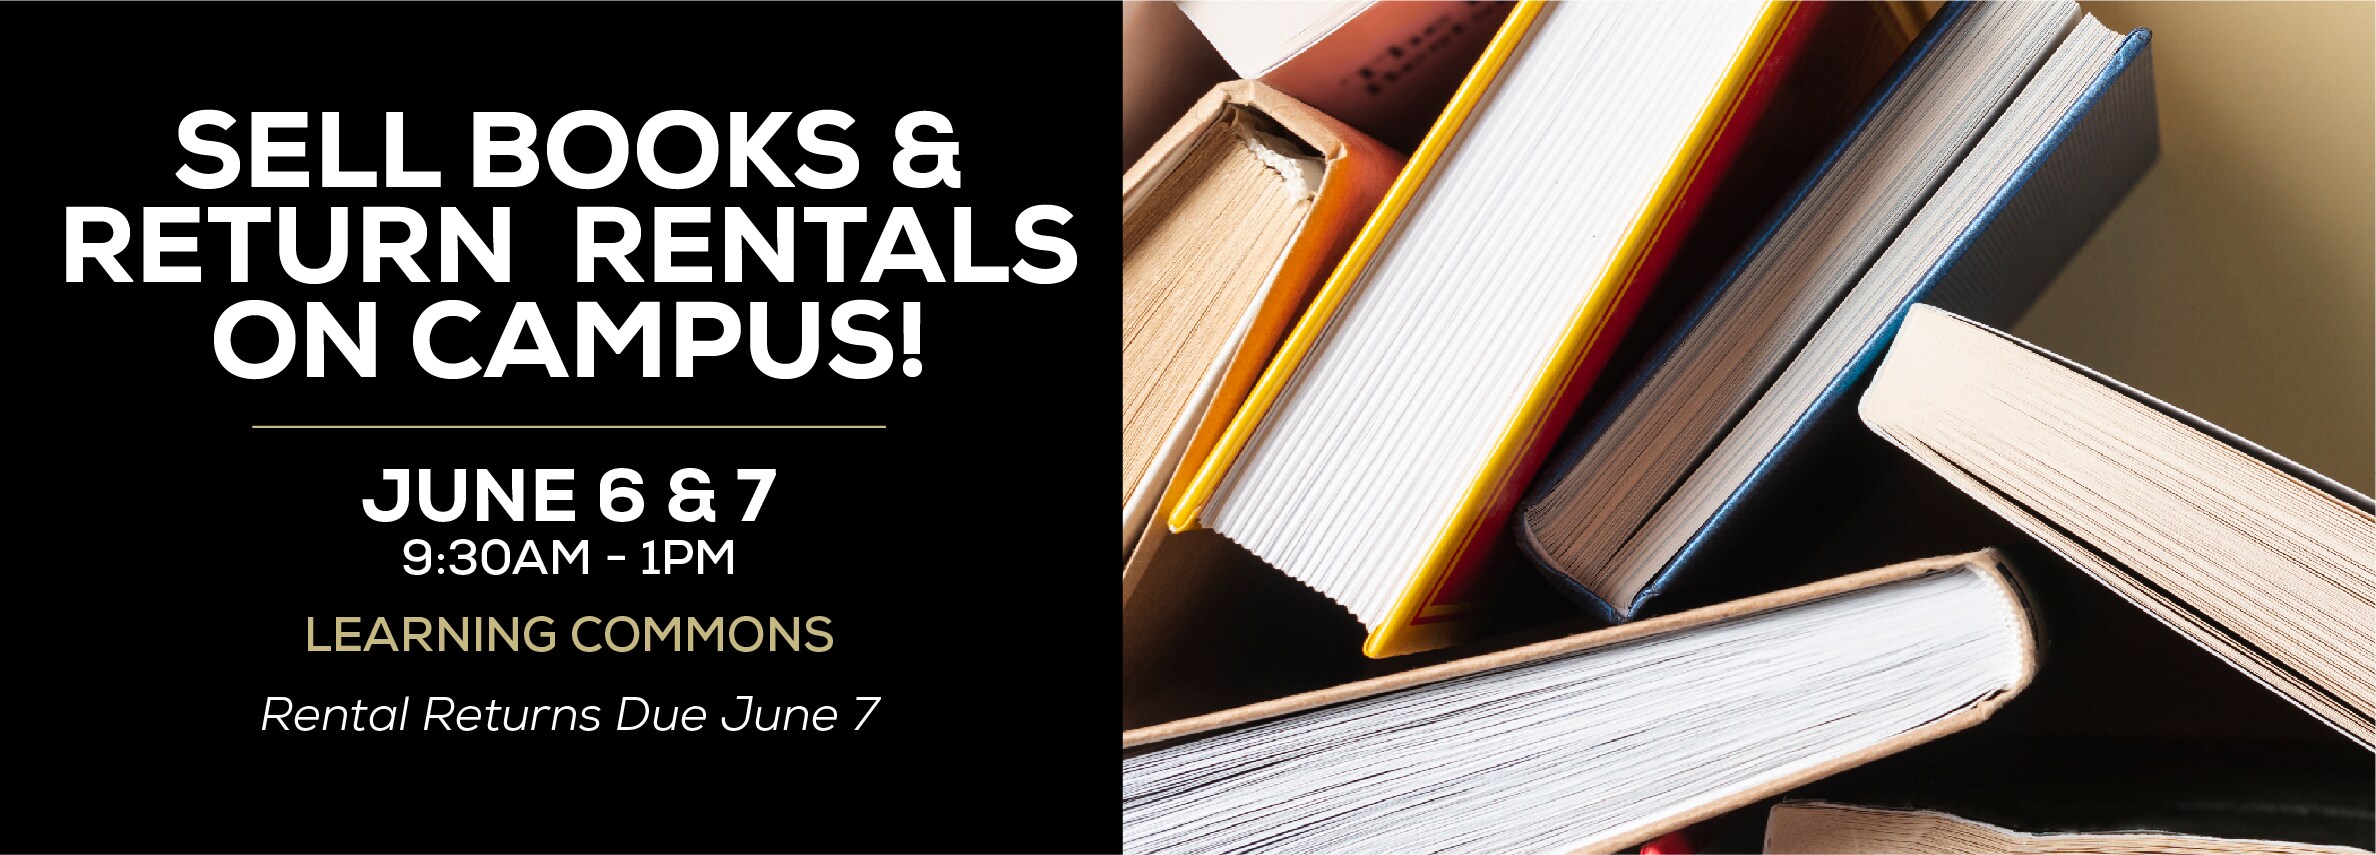 Sell books and return rentals on campus! June 6 & 7. 9:30am to 1pm in the Learning Commons. Rental returns due June 7/